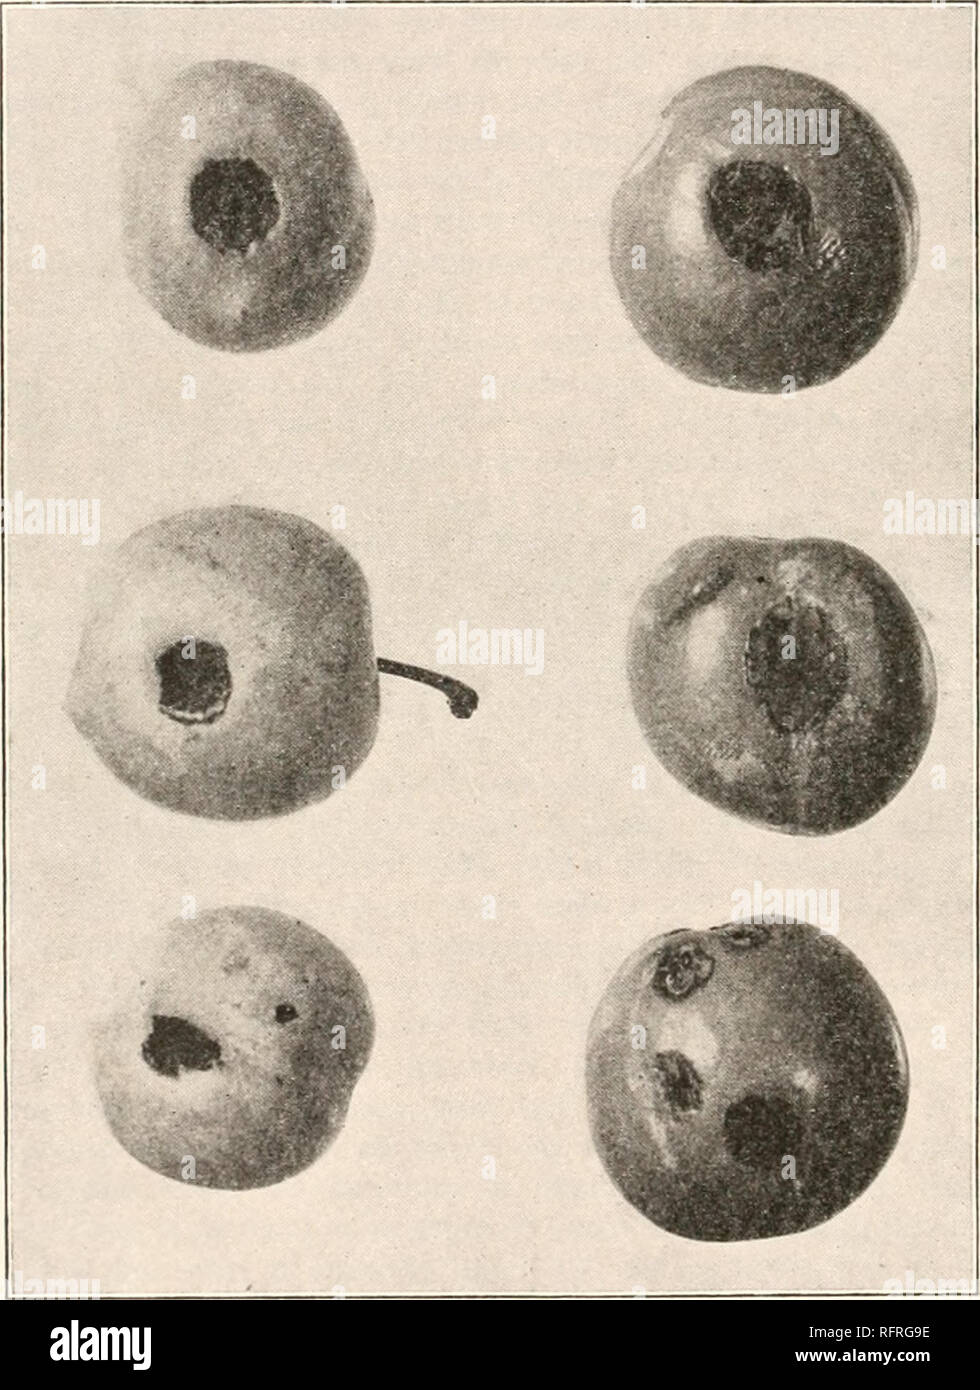 . Carnegie Institution of Washington publication. 6o BACTERIA IN RELATION TO PLANT DISEASES. that not every chance organism will produce this disease when introduced into the stomata, but only Bad. pruni. In 1898 the writer pointed out that Bacterium stewarti probably enters the plant through the water-pores situated at the tips of the leaves. The examination of diseased maize-plants found in southwestern Michigan led to this assumption. The tips of many of the leaves were dead, while the basal parts were living. The vessels in the tips of the leaves. Fig. 13.* were occupied by the bacteria, w Stock Photo